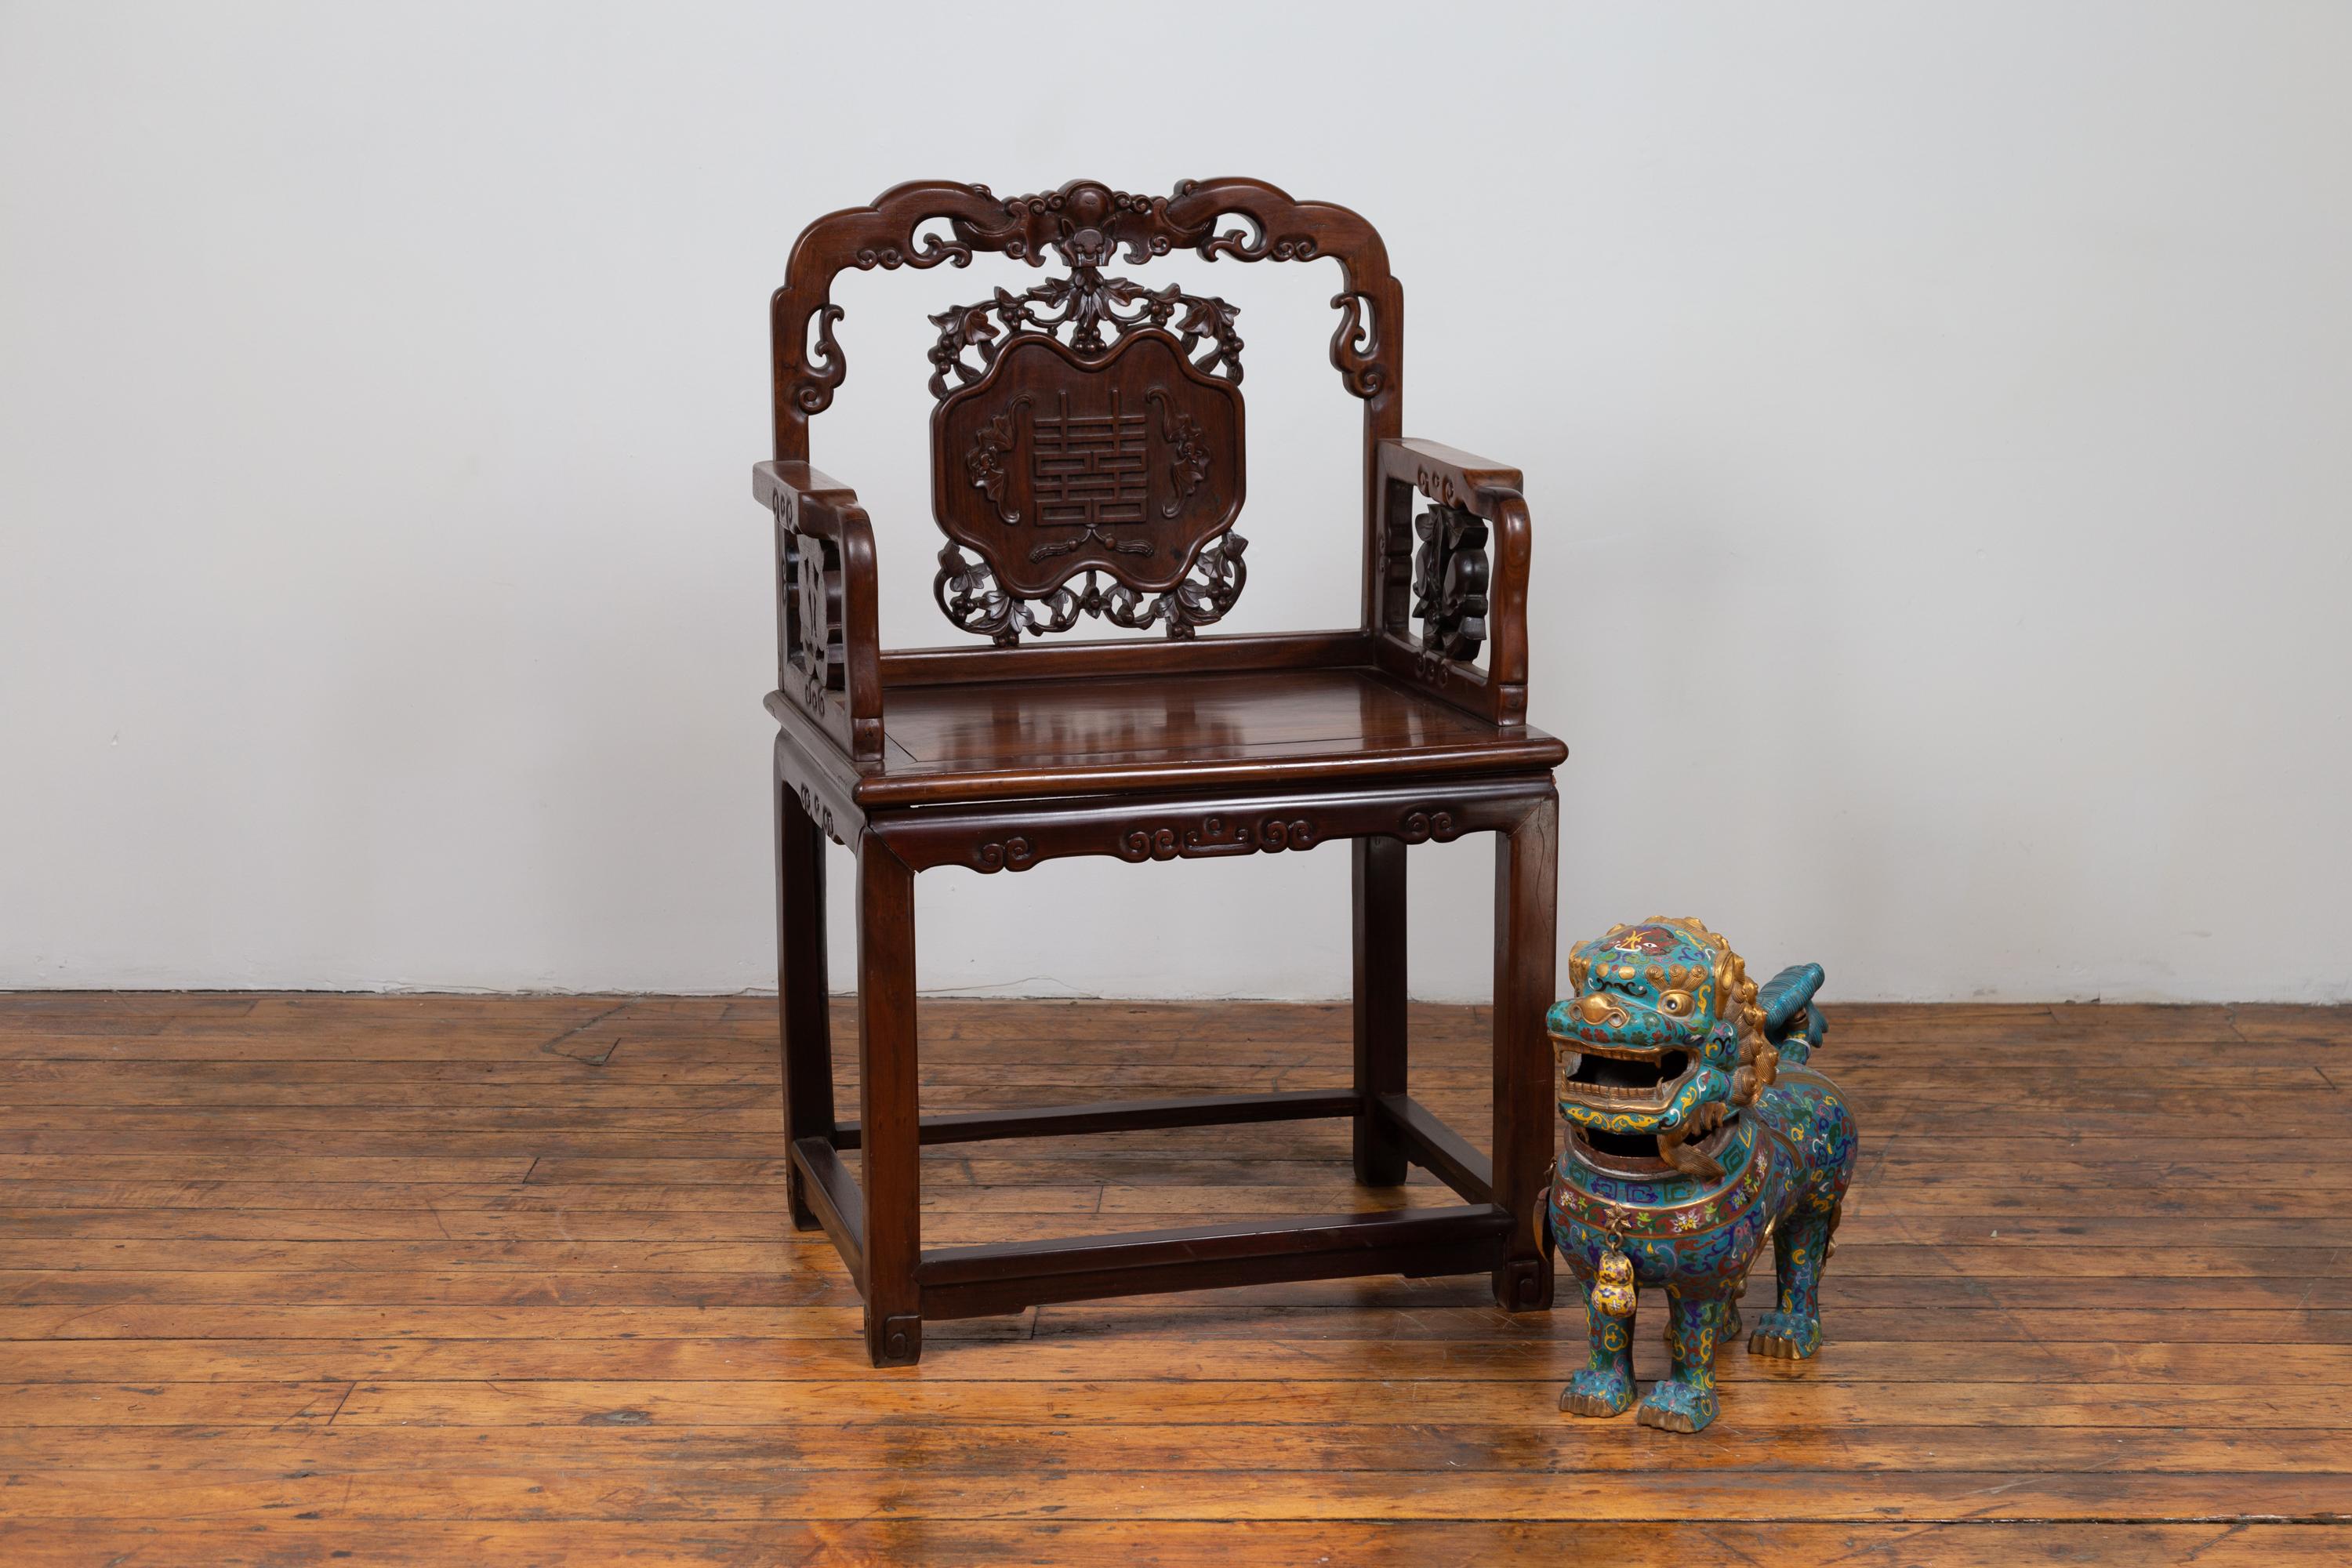 A Chinese rosewood chair from the 19th century, with hand carved splat and arms. Born in China during the 19th century, this exquisite rosewood chair grabs our attention with its stunning back, adorned with scrolling patterns and a central splat,